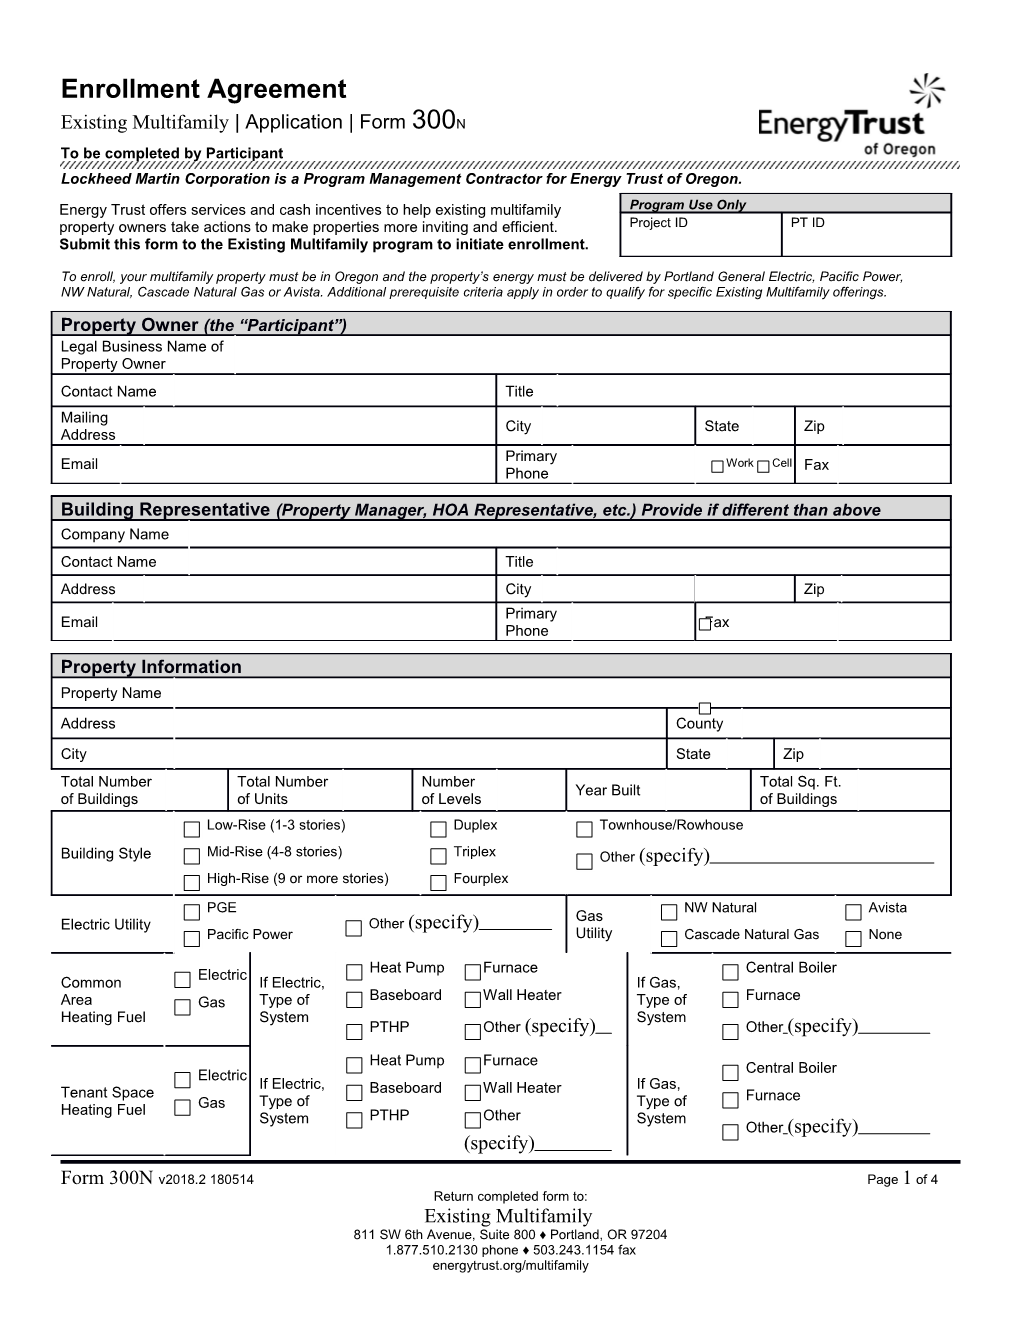 Existing Multifamily Application Form 300N